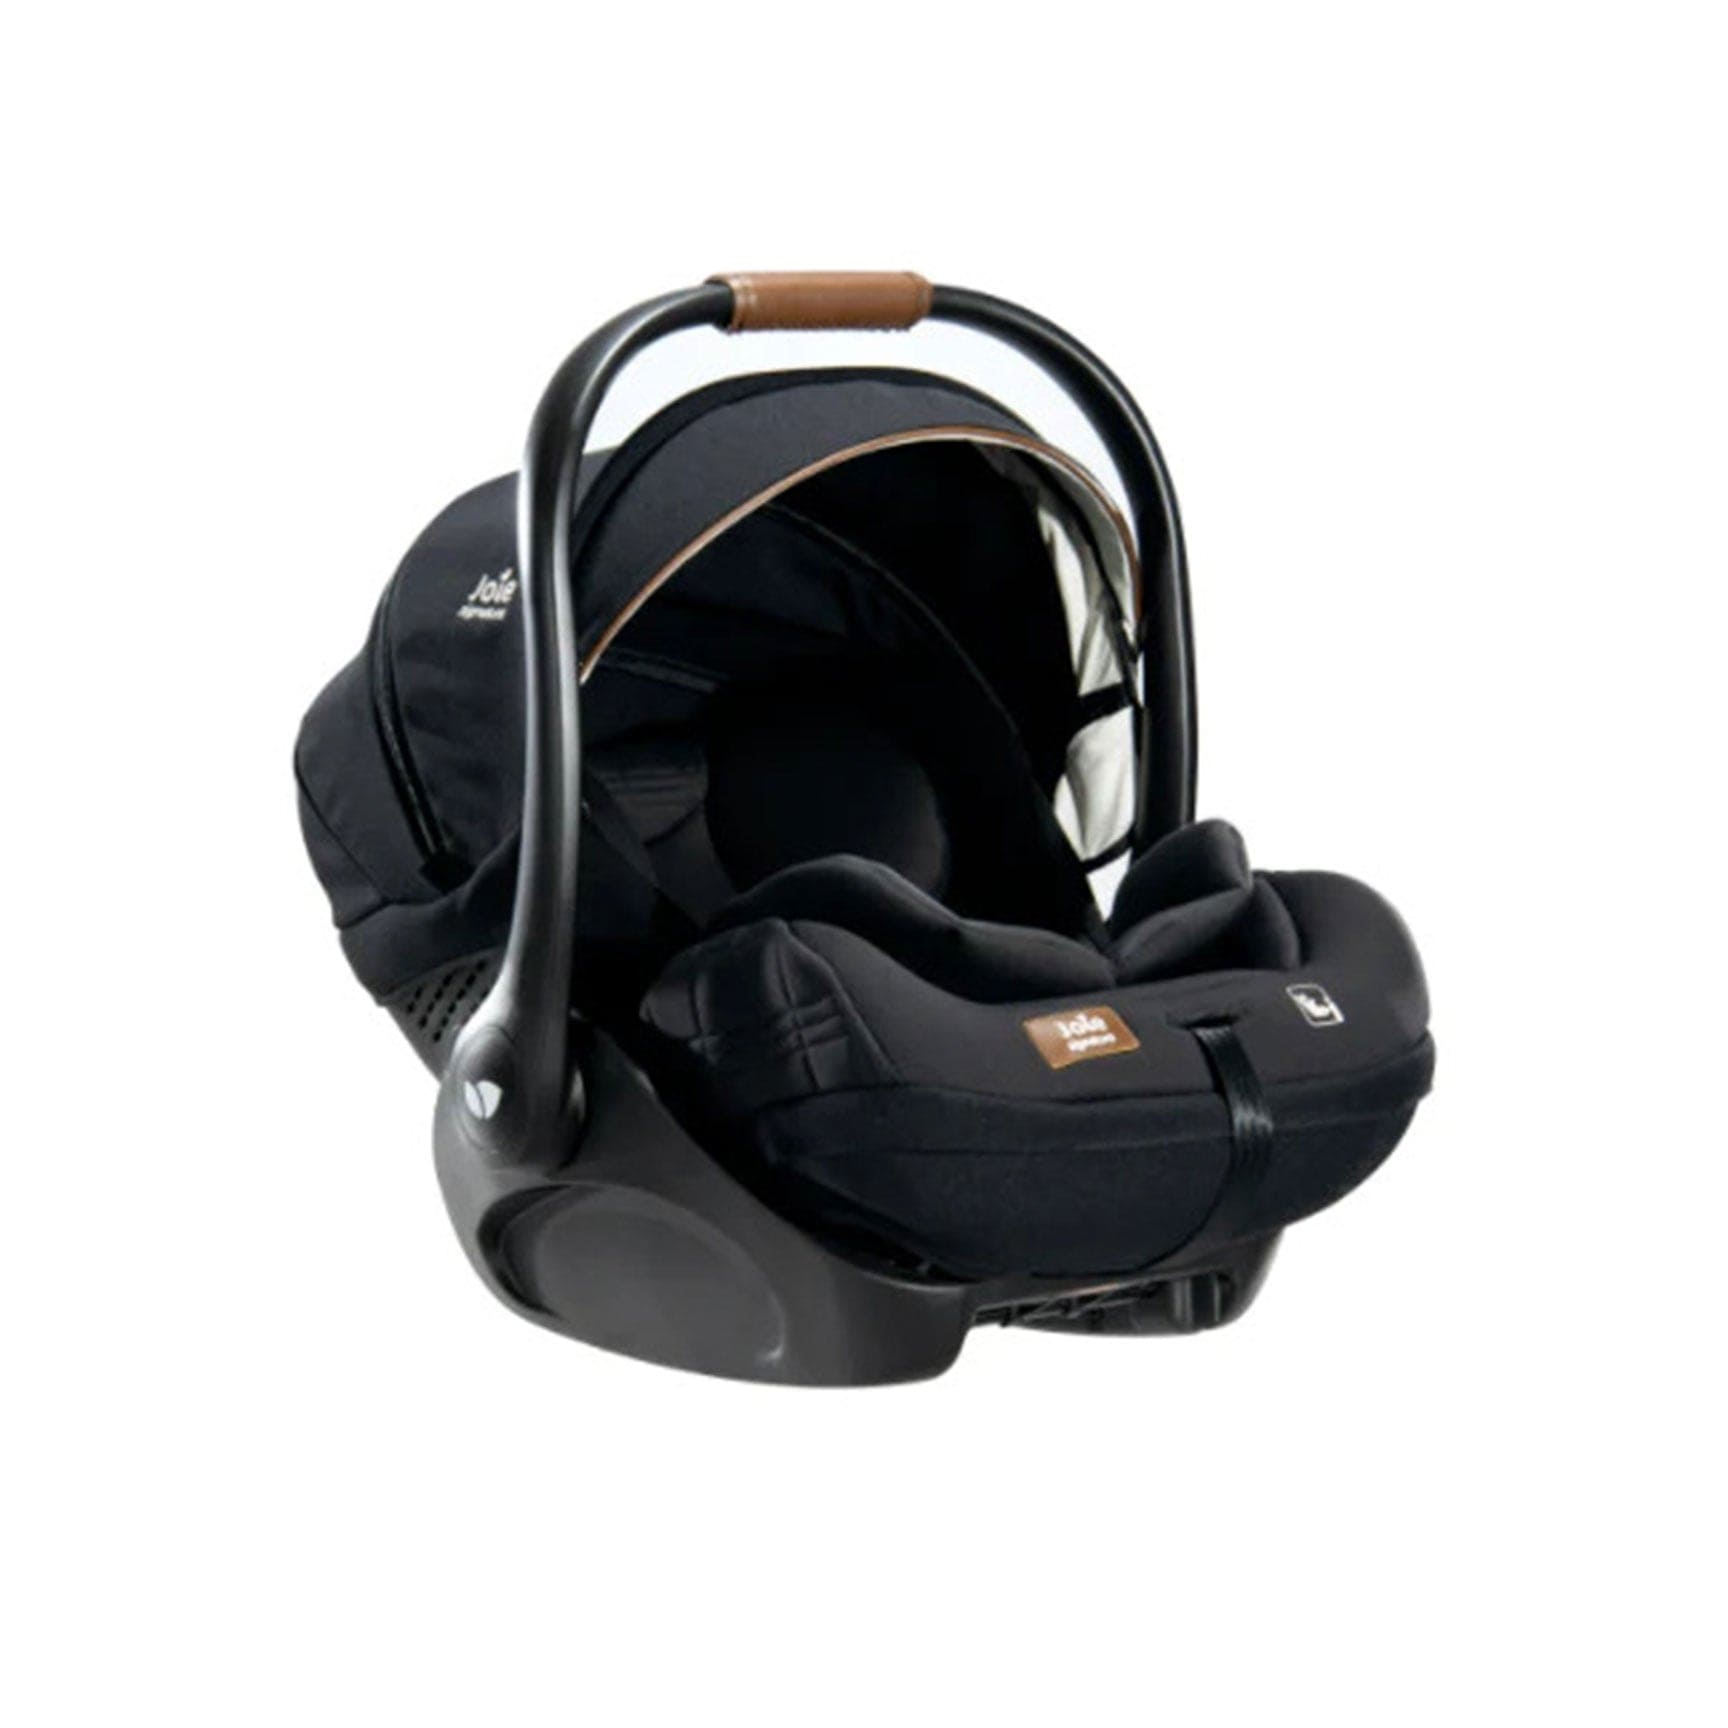 Joie baby car seats Joie i-Level Recline Signature Car Seat - Eclipse C1510GAECL000